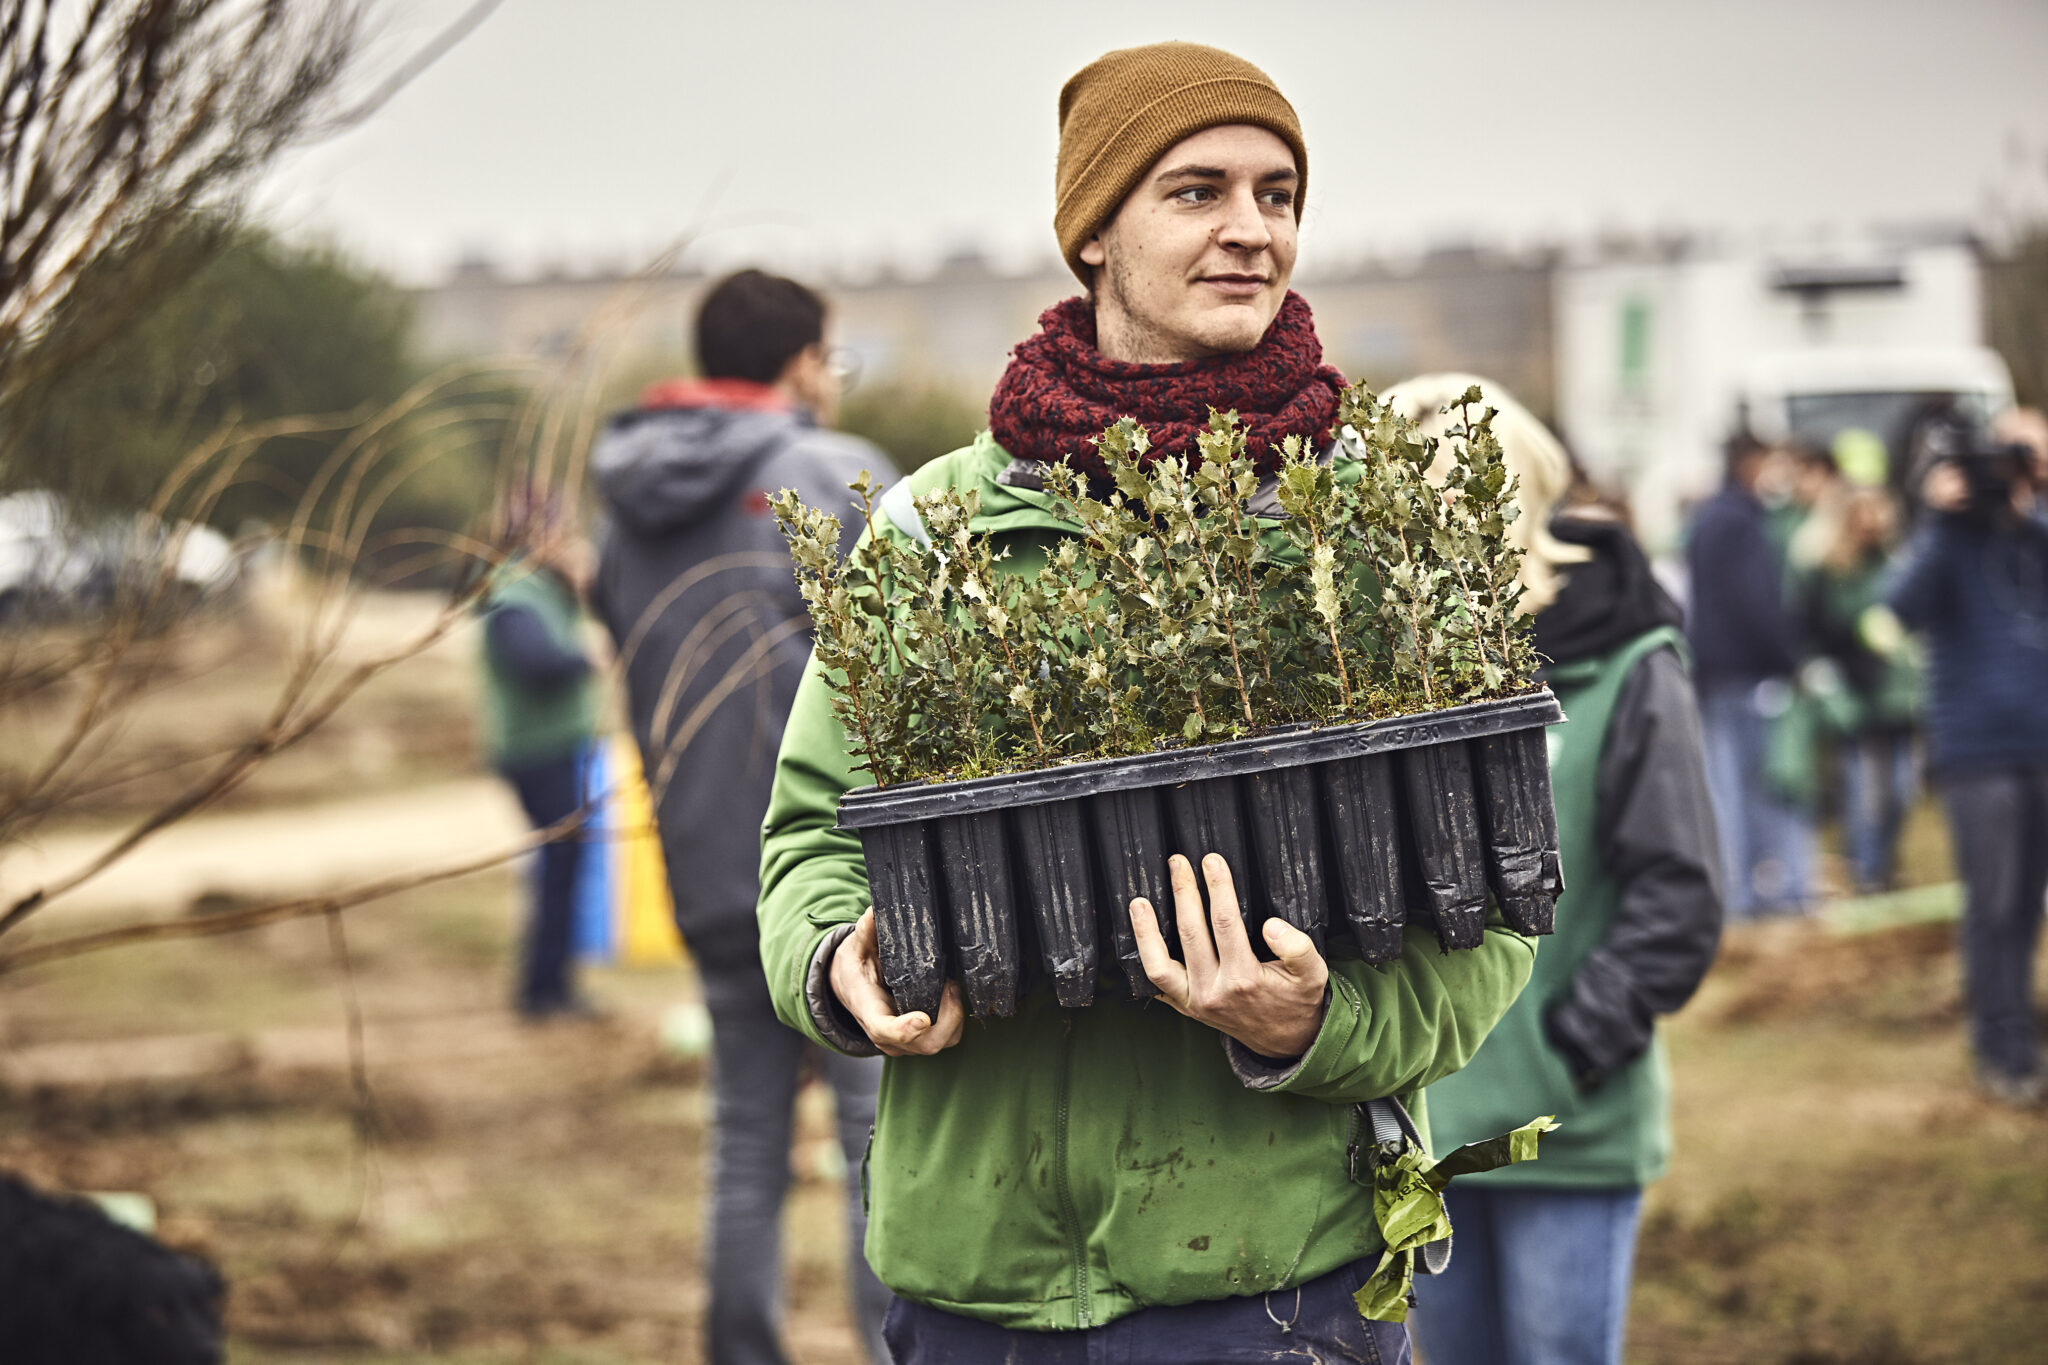 Life Terra seeks to bring people together to plant 500 million trees in 5 years, harnessing and monitoring nature’s own carbon capture mechanism and enabling citizens to take urgent action against the climate crisis.